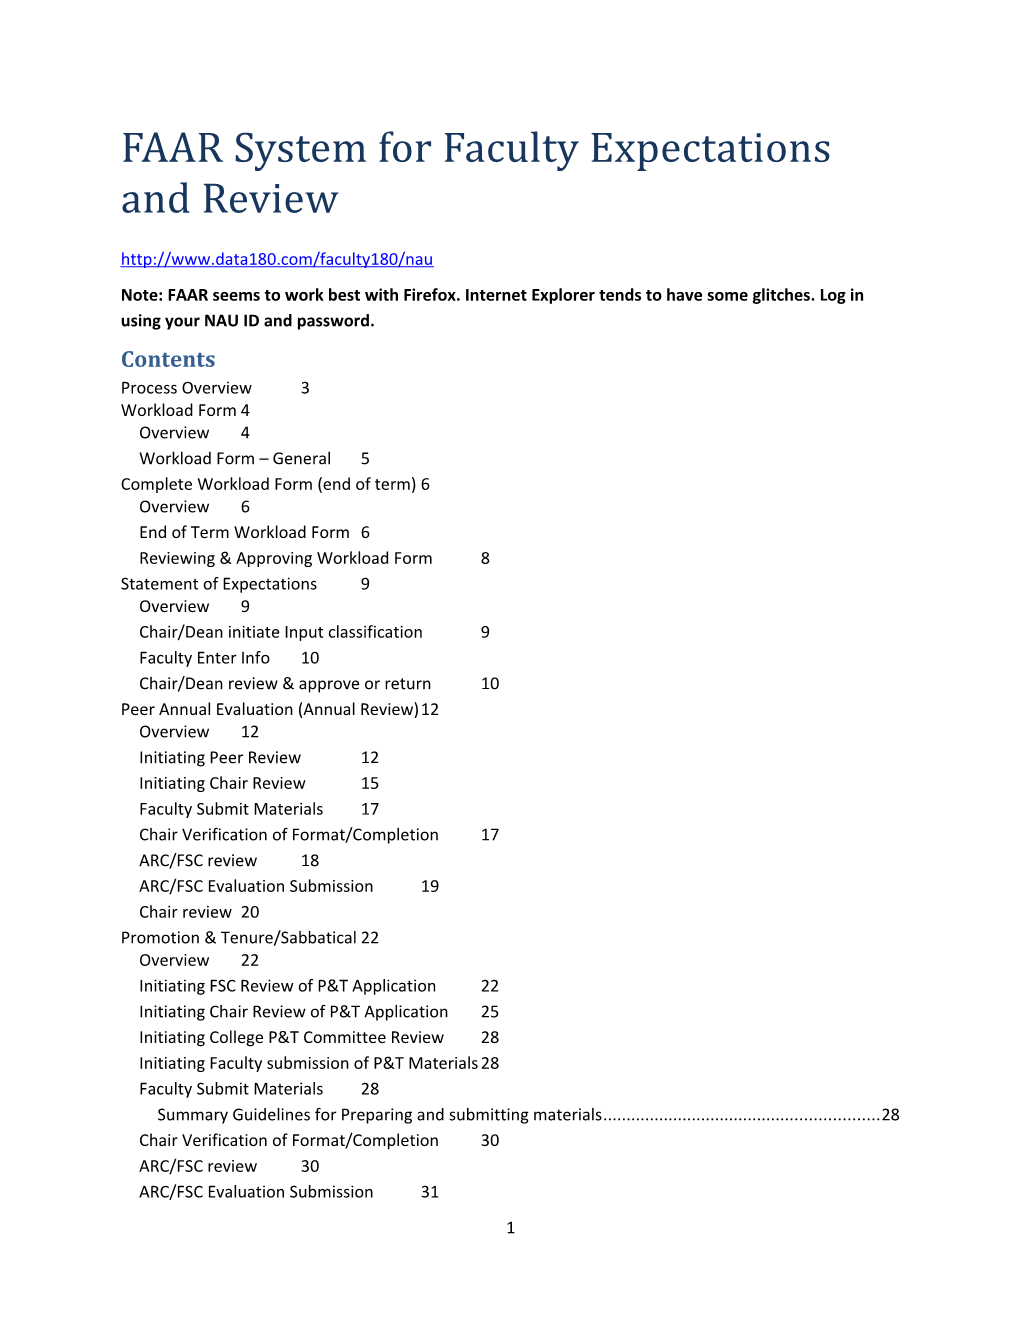 FAAR System for Faculty Expectations and Review